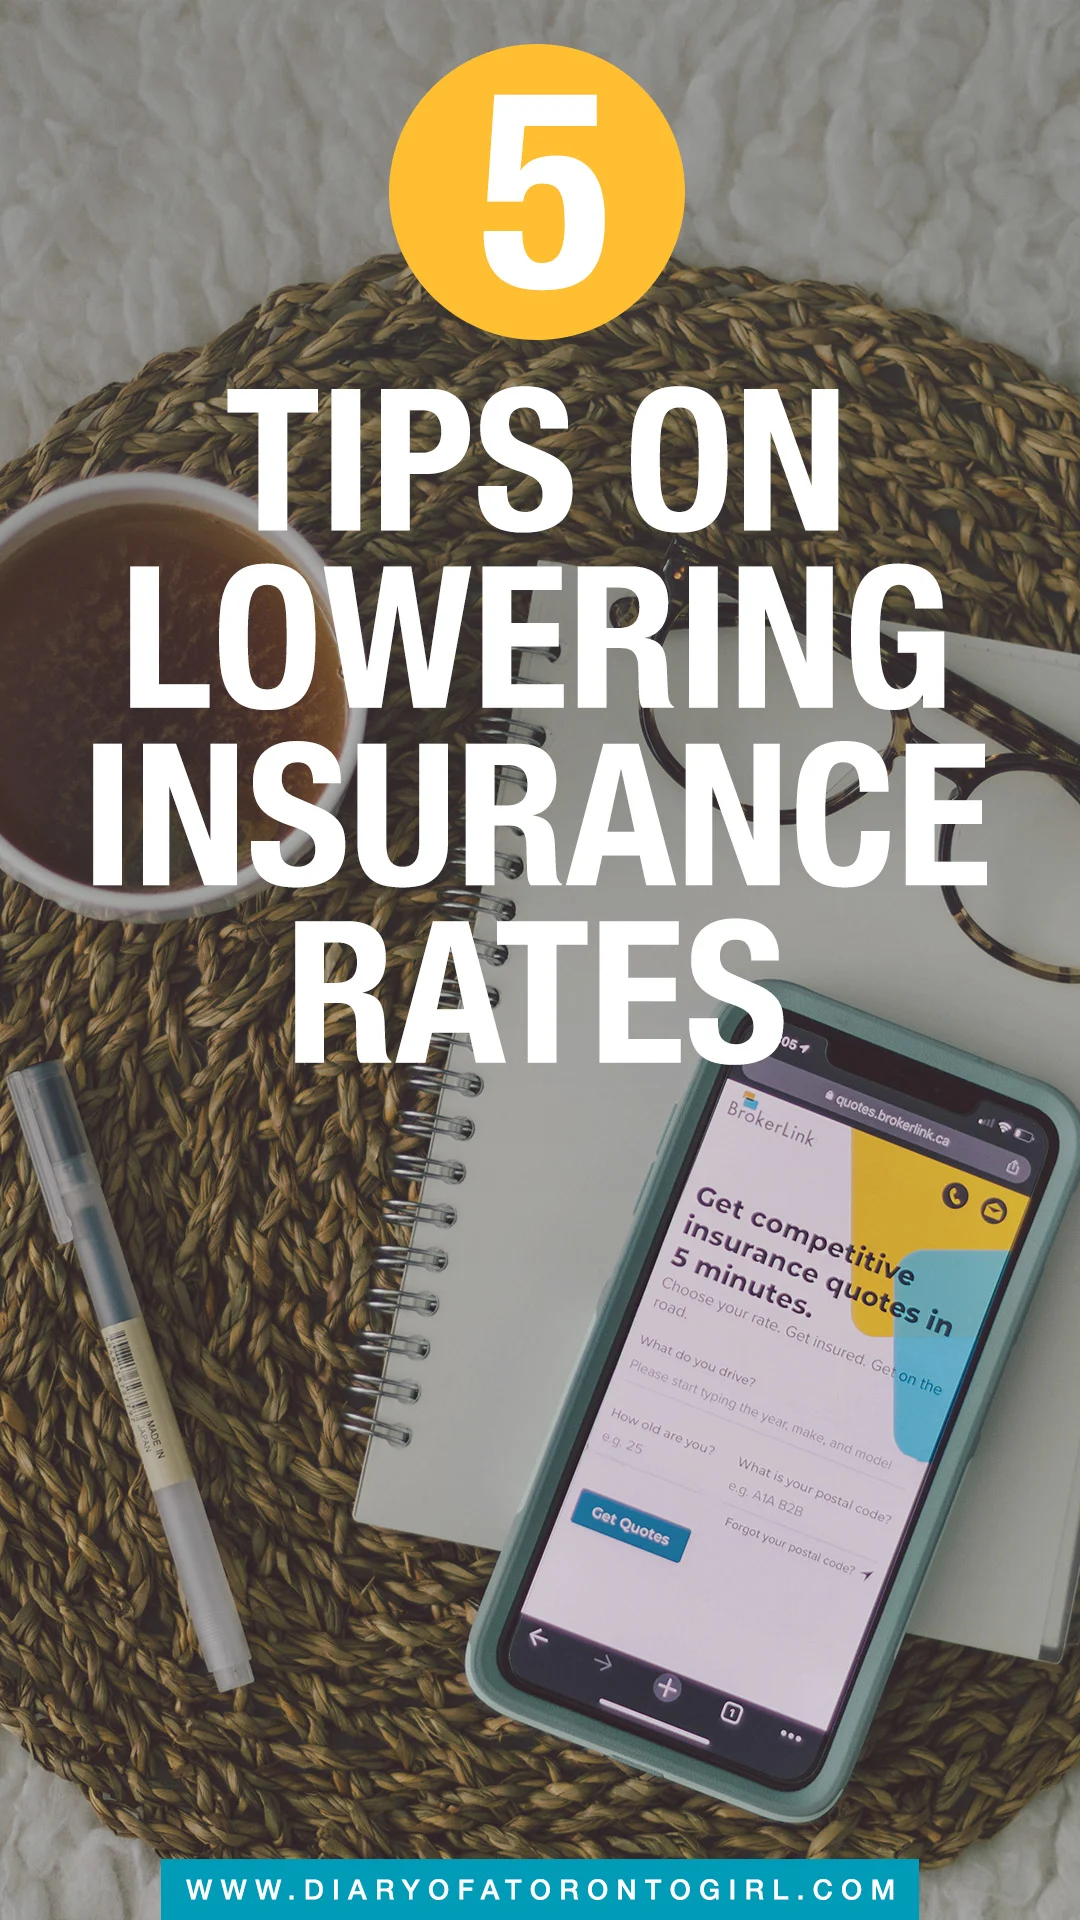 Tips on lowering insurance rates in Toronto